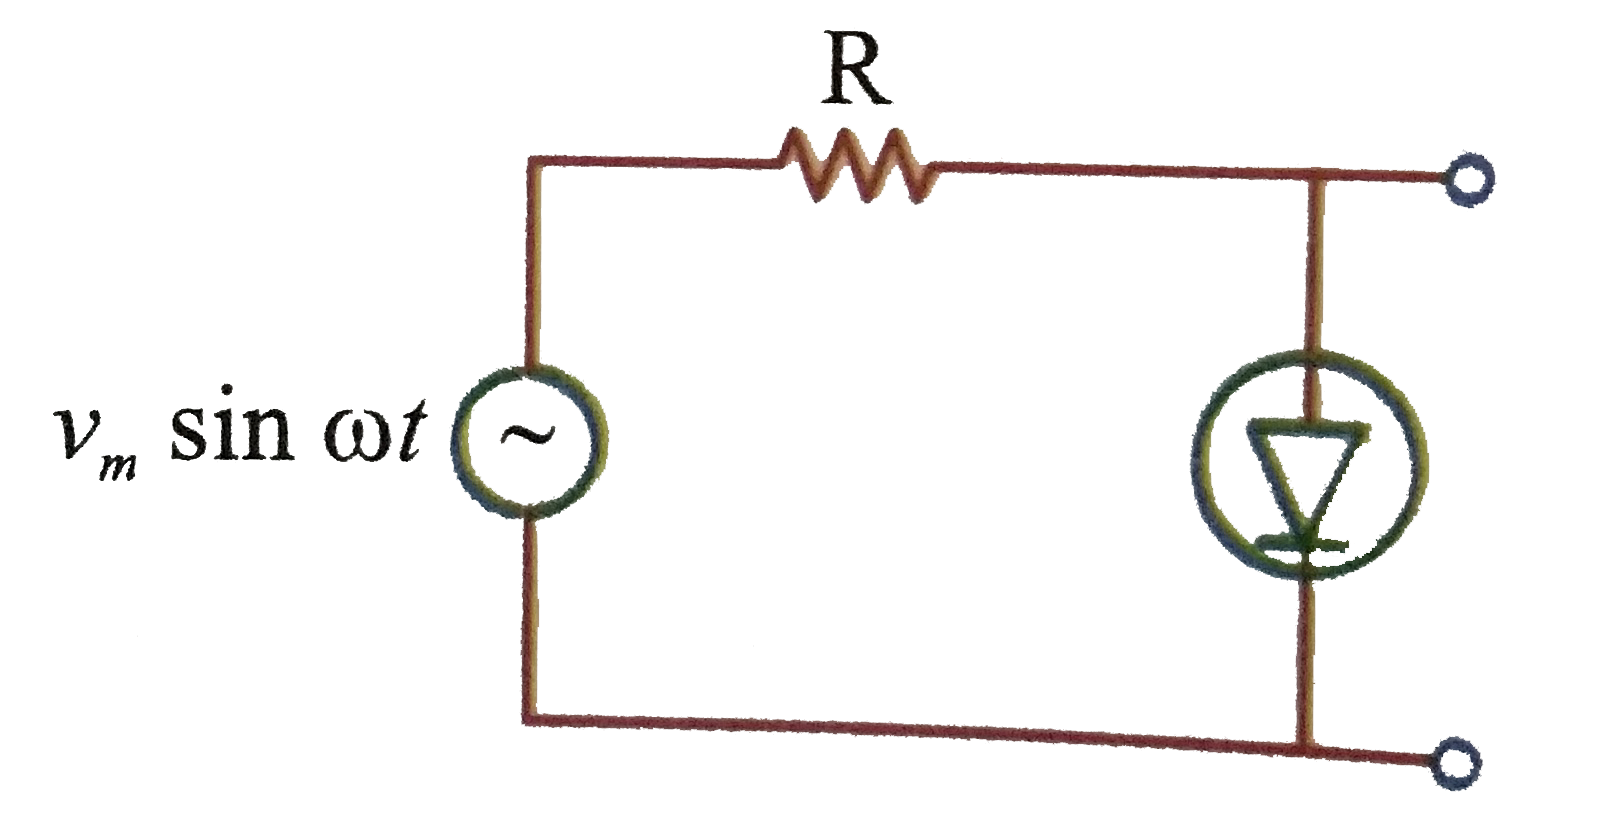 The output of the given circuit in Fig.   .